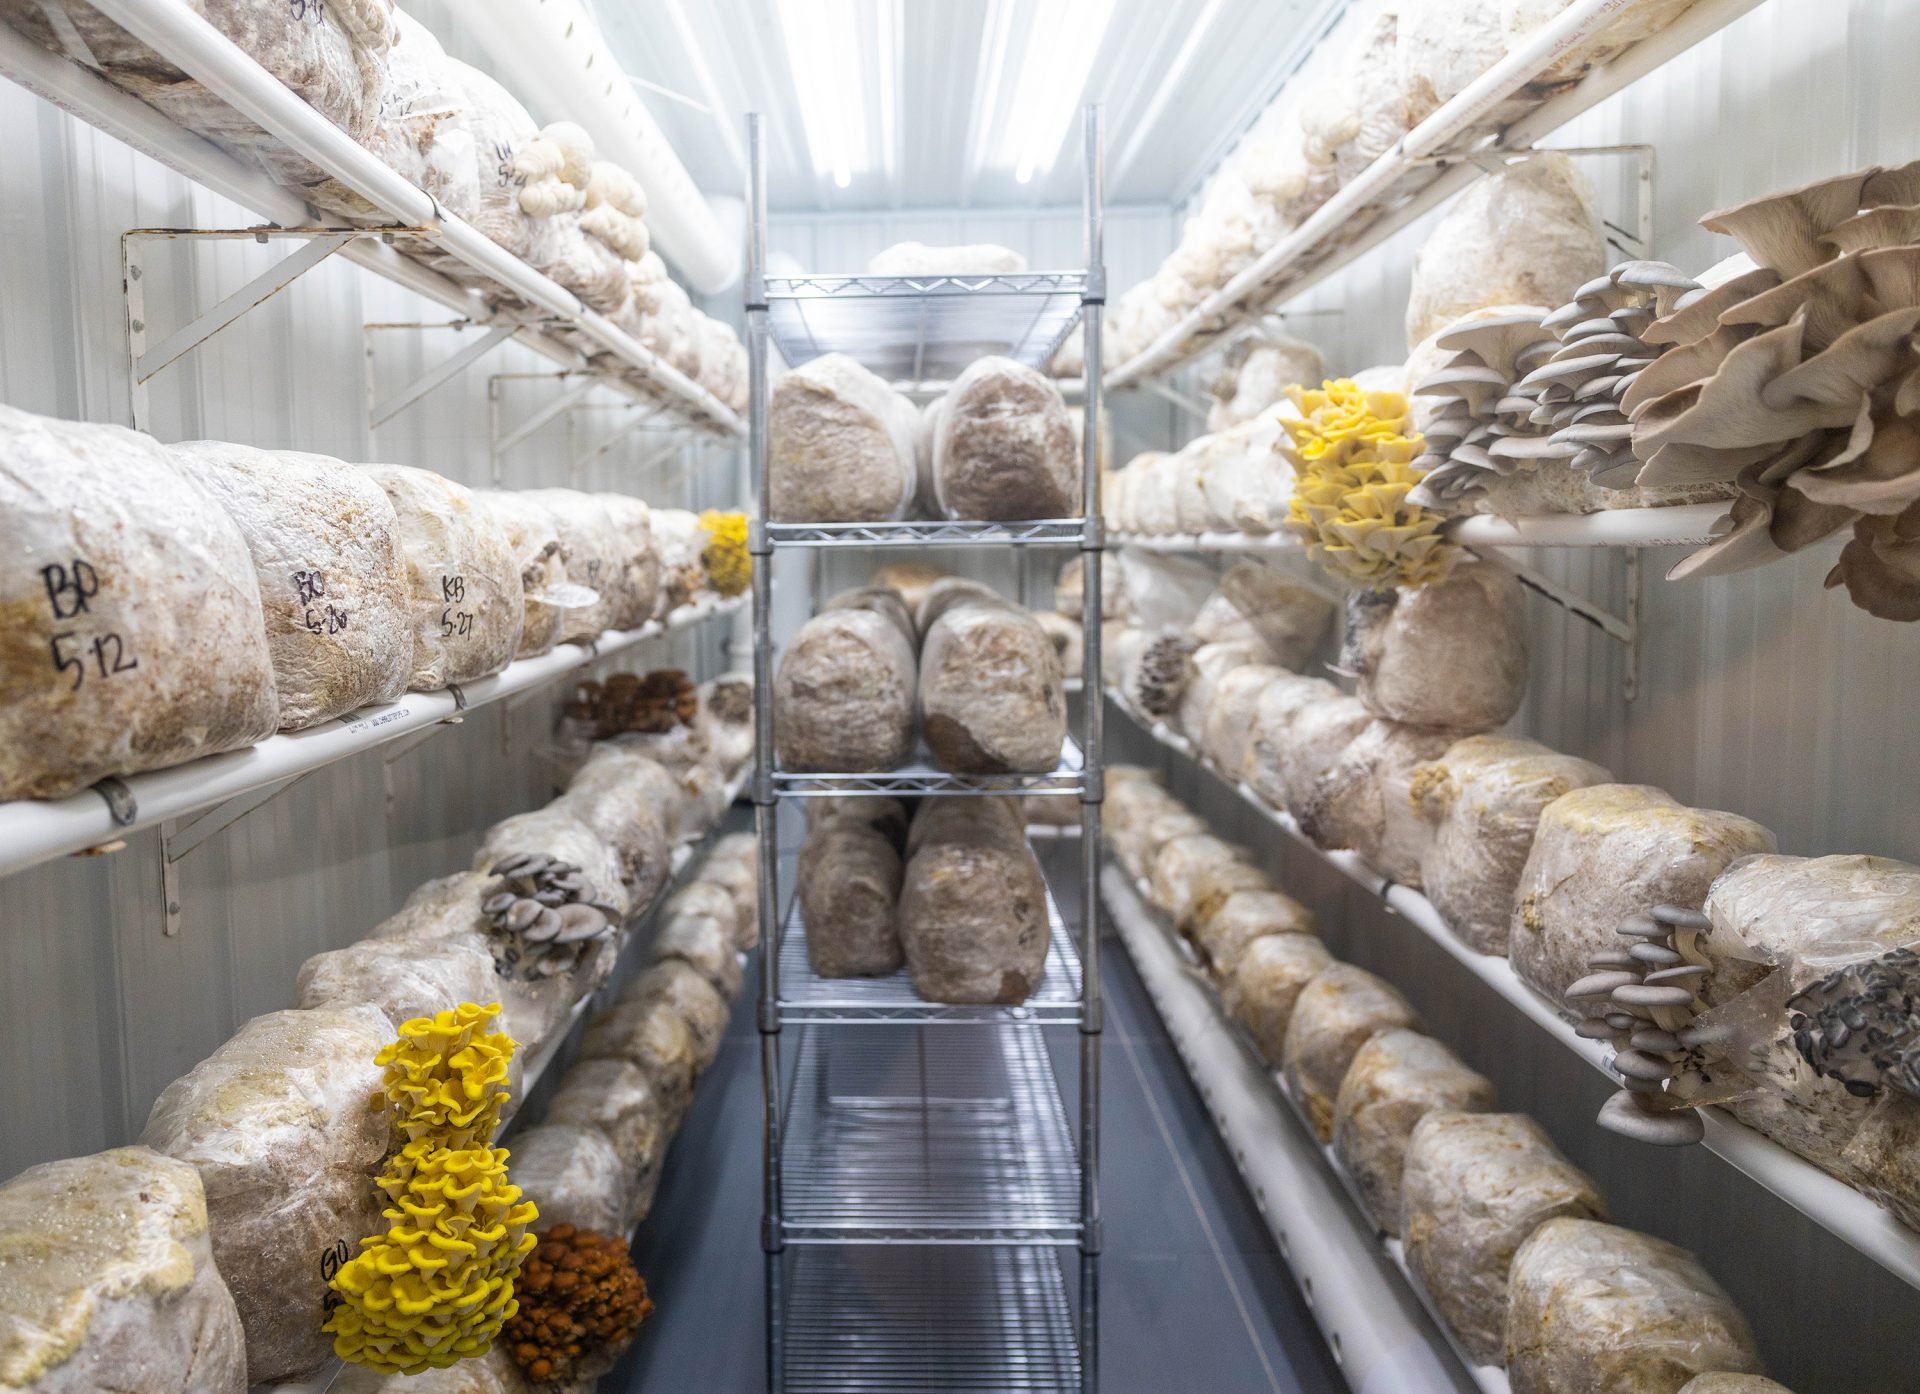 An indoor space filled with cultivated mushrooms